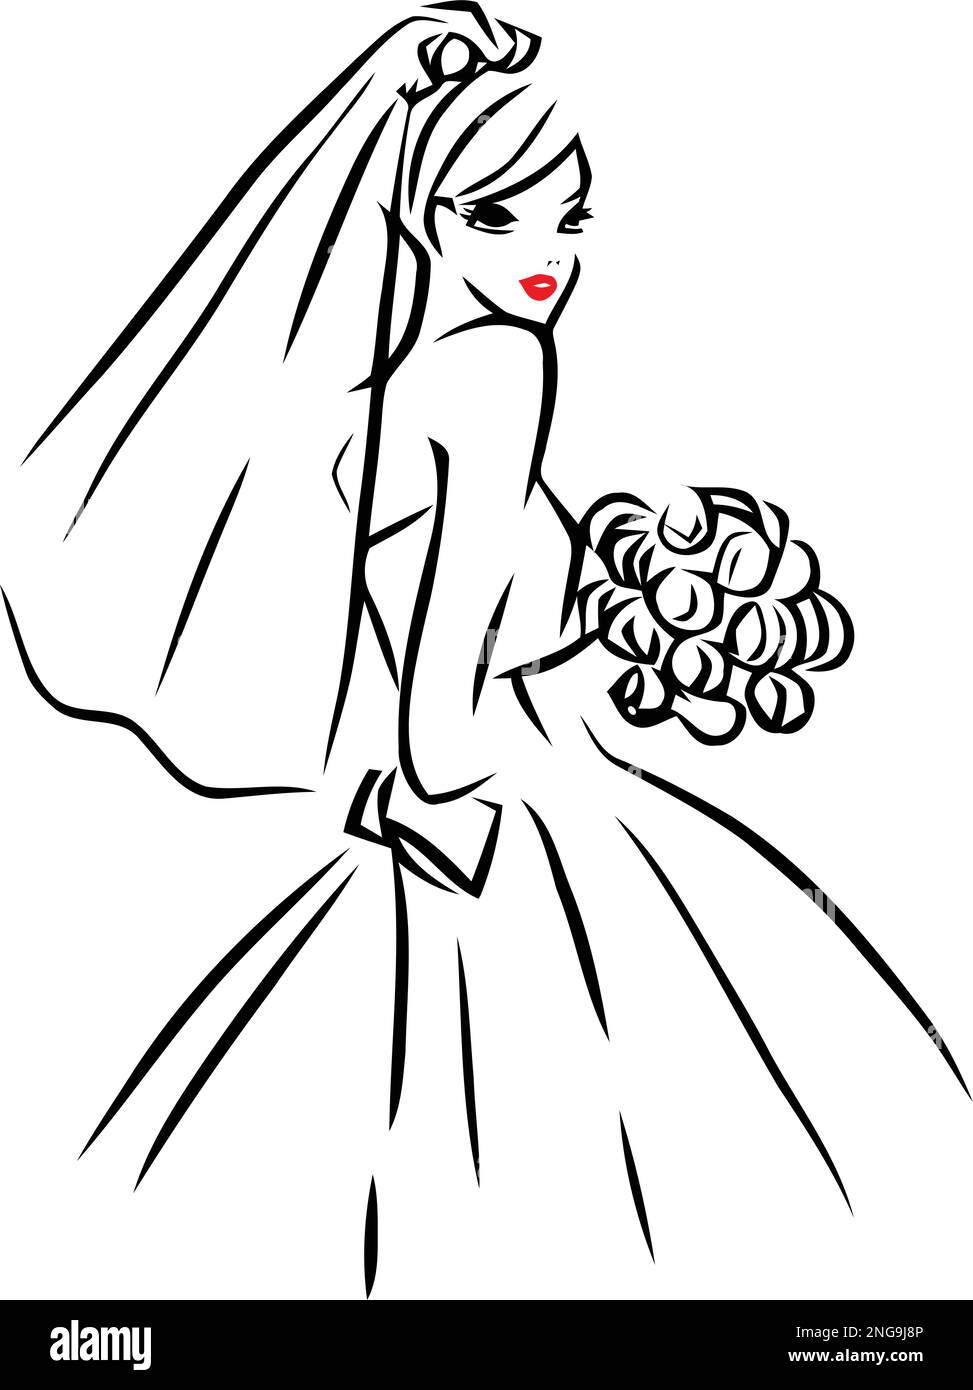 This image is a vector illustration of a line art style beautiful bride holding a wedding bouquet of roses and wearing a wedding veil. The drawing is Stock Vector